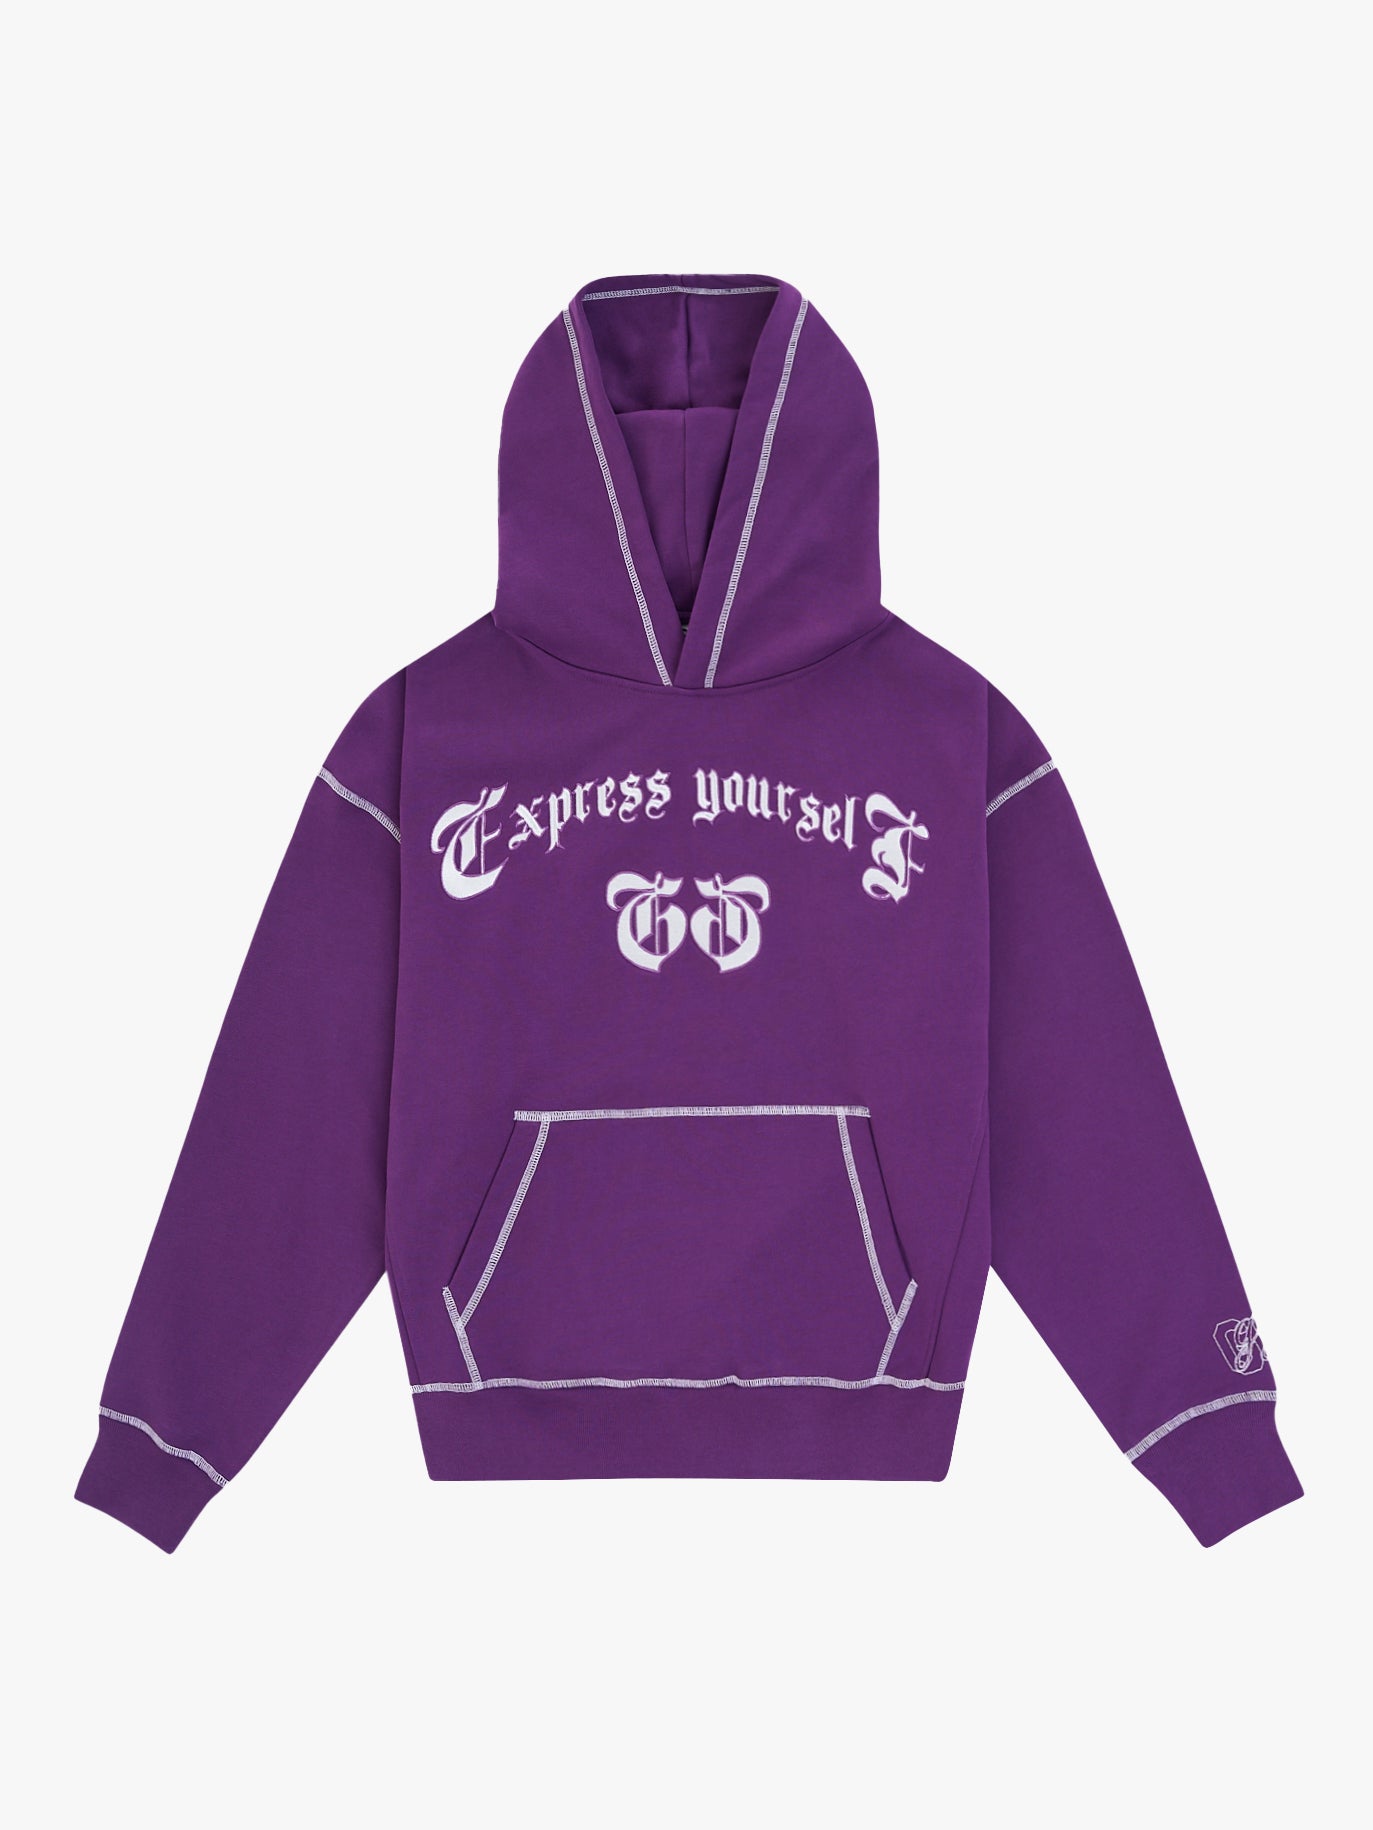 Express Yourself Hoodie (Large)